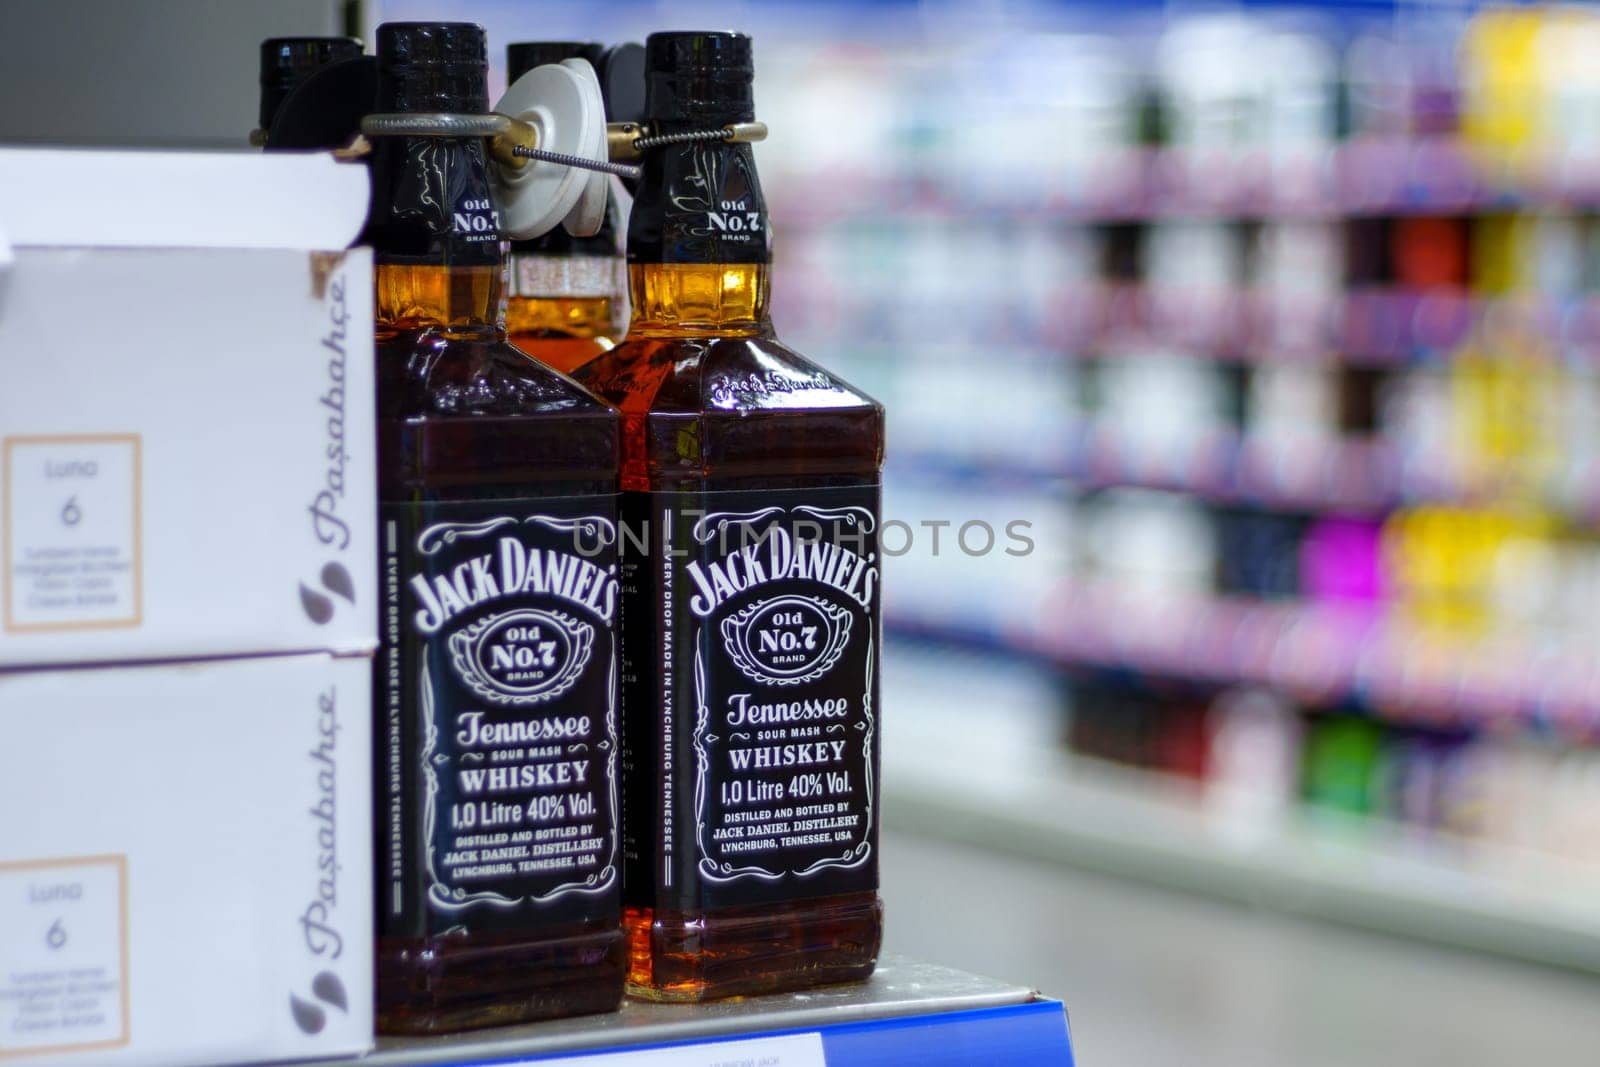 Tyumen, Russia-March 02, 2024: Bottles of Jack Daniels Tennessee Whiskey are showcased prominently on a retail shelf. by darksoul72